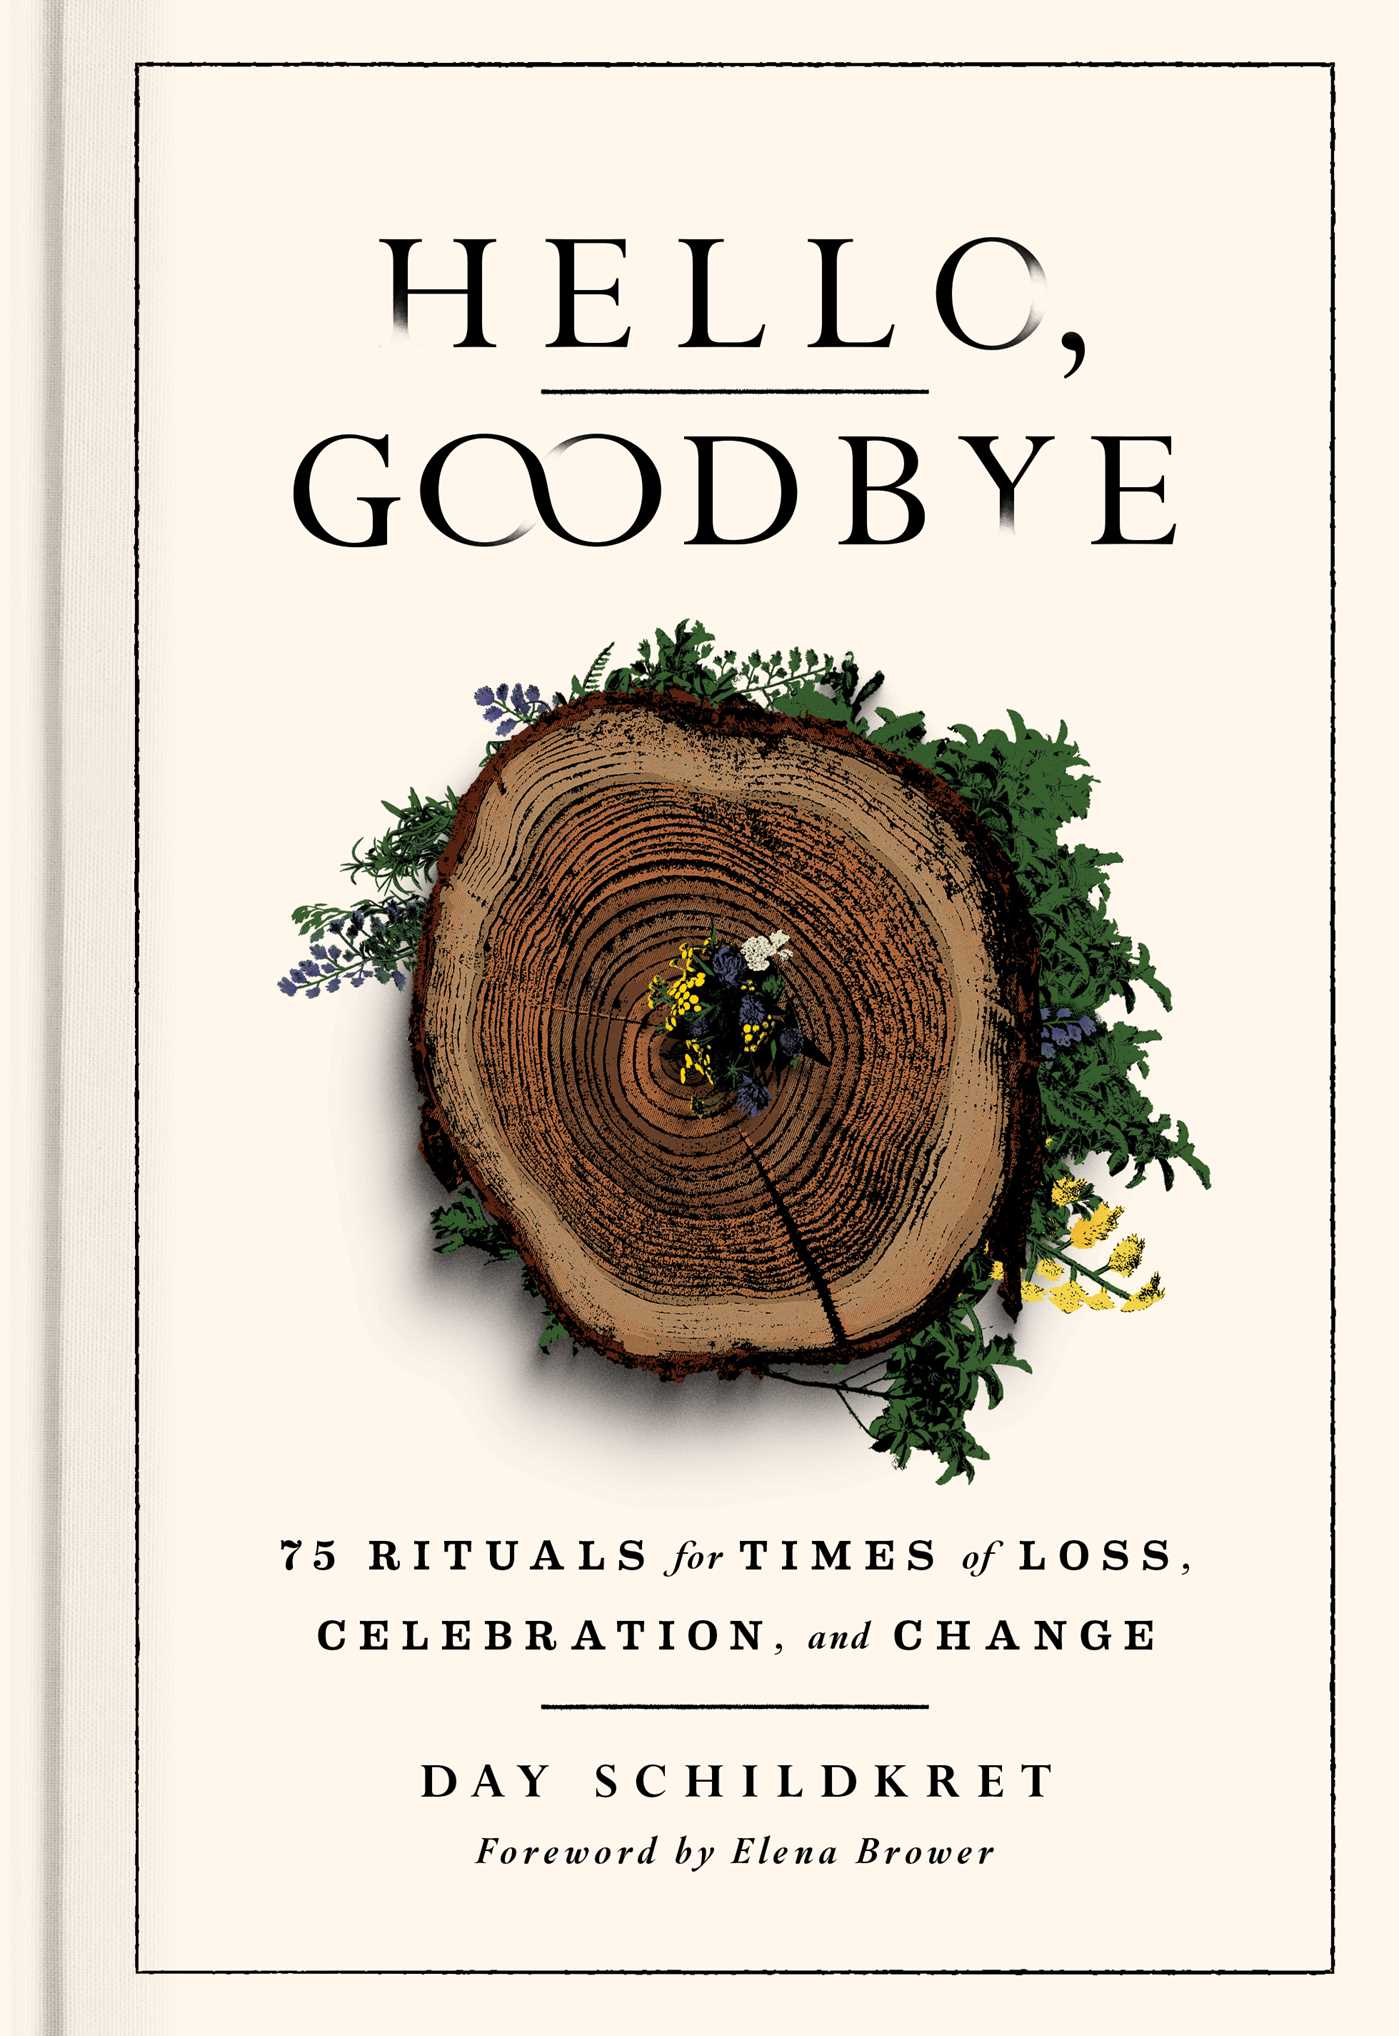 Hello, Goodbye : 75 Rituals for Times of Loss, Celebration, and Change